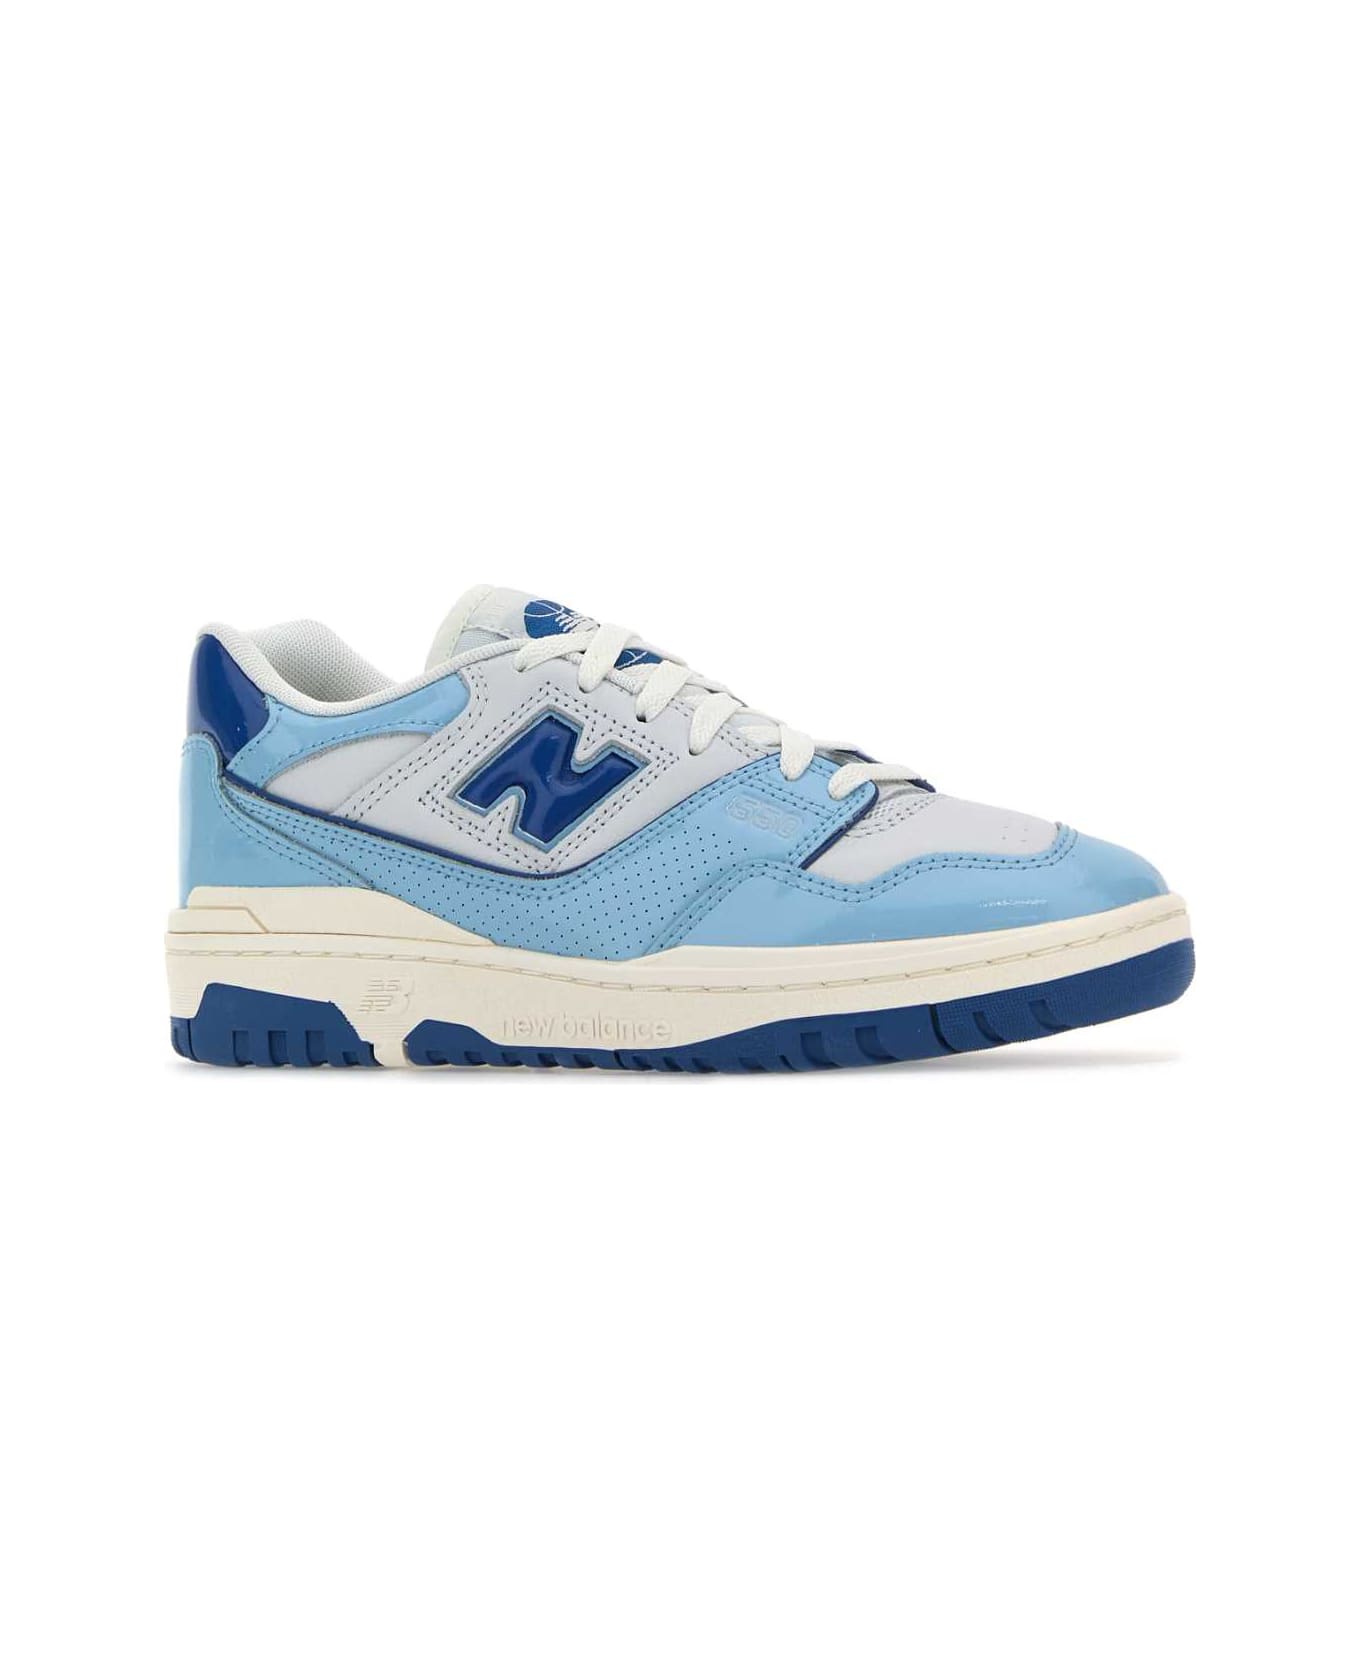 New Balance Multicolor Leather 550 Sneakers - CHROMEBLUE スニーカー